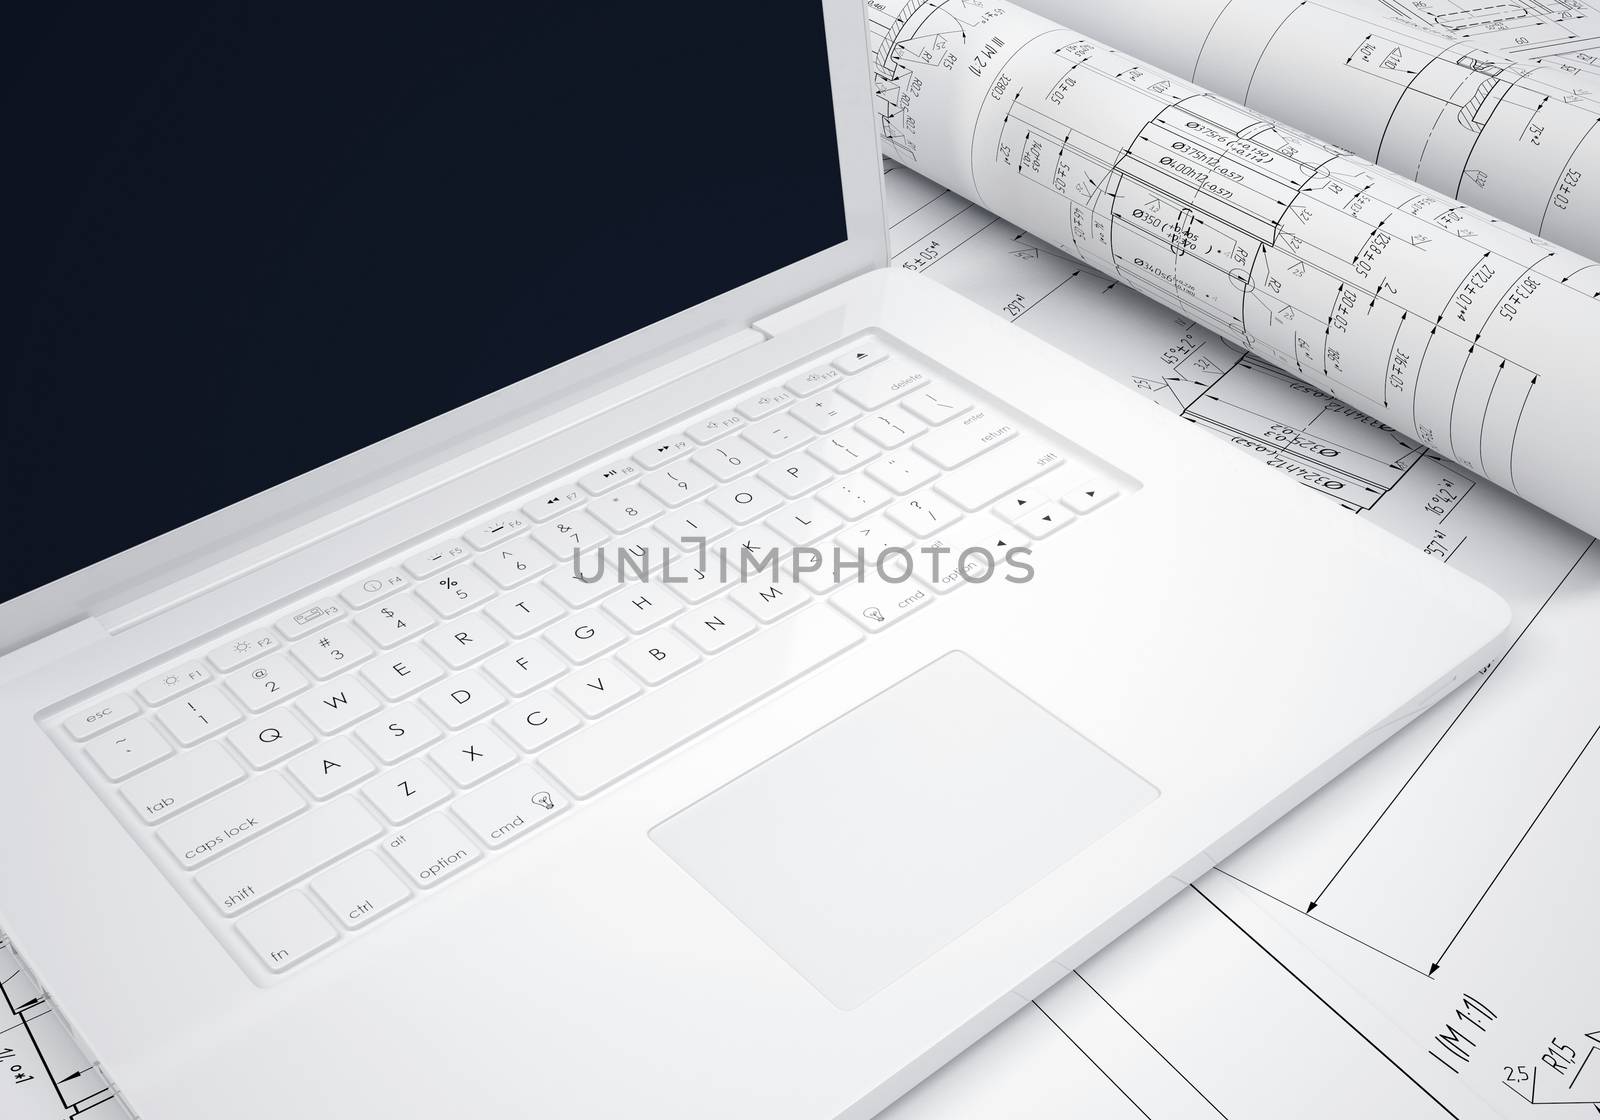 Scrolls engineering drawings and laptop by cherezoff